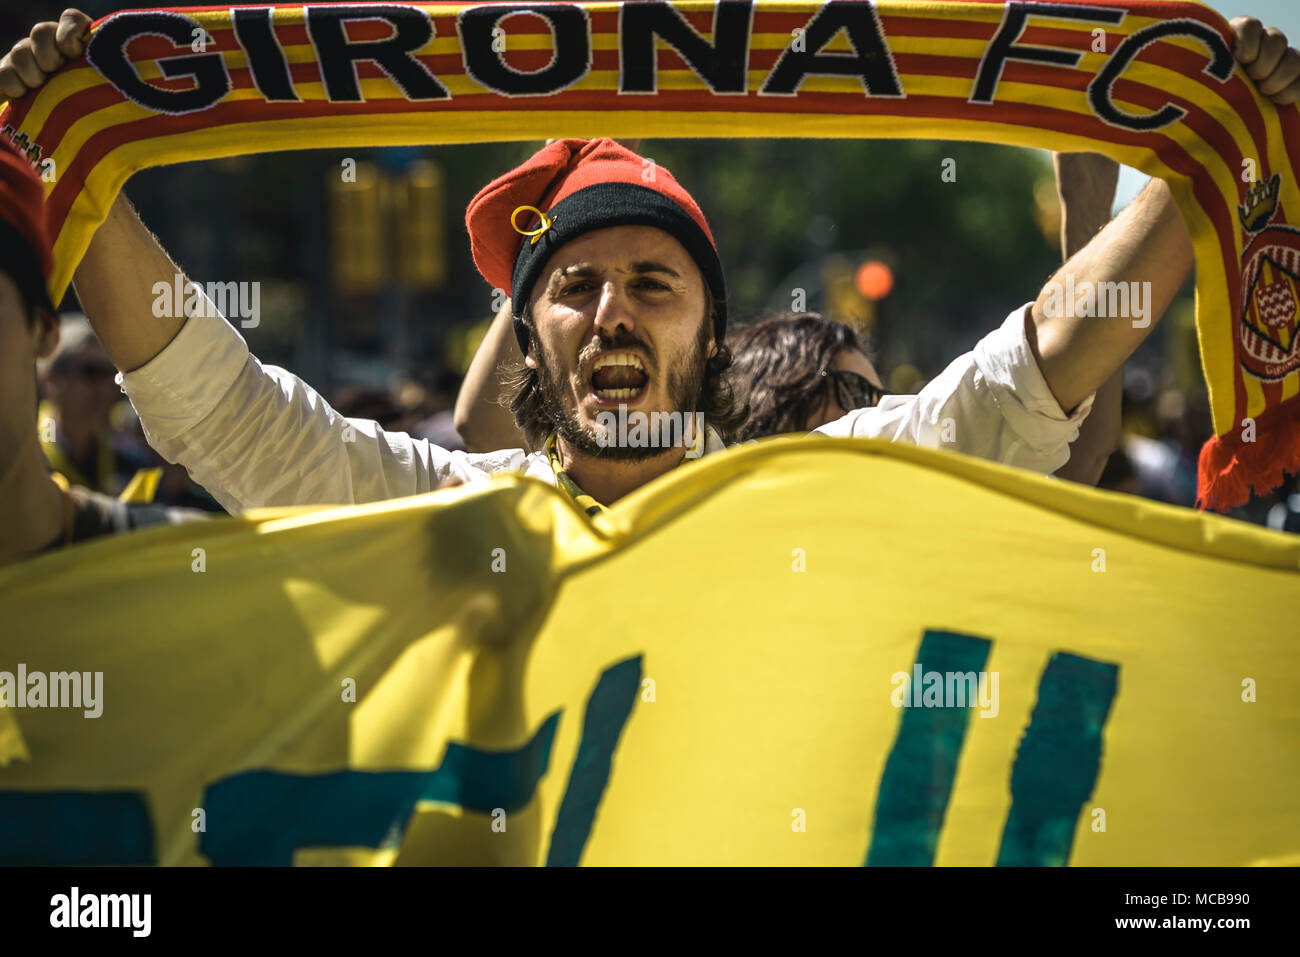 Barcelona, Spain. 15 April, 2018: Thousands of Catalan separatists shout slogans as they protest for the release of jailed pro-independence politicians Credit: Matthias Oesterle/Alamy Live News Stock Photo